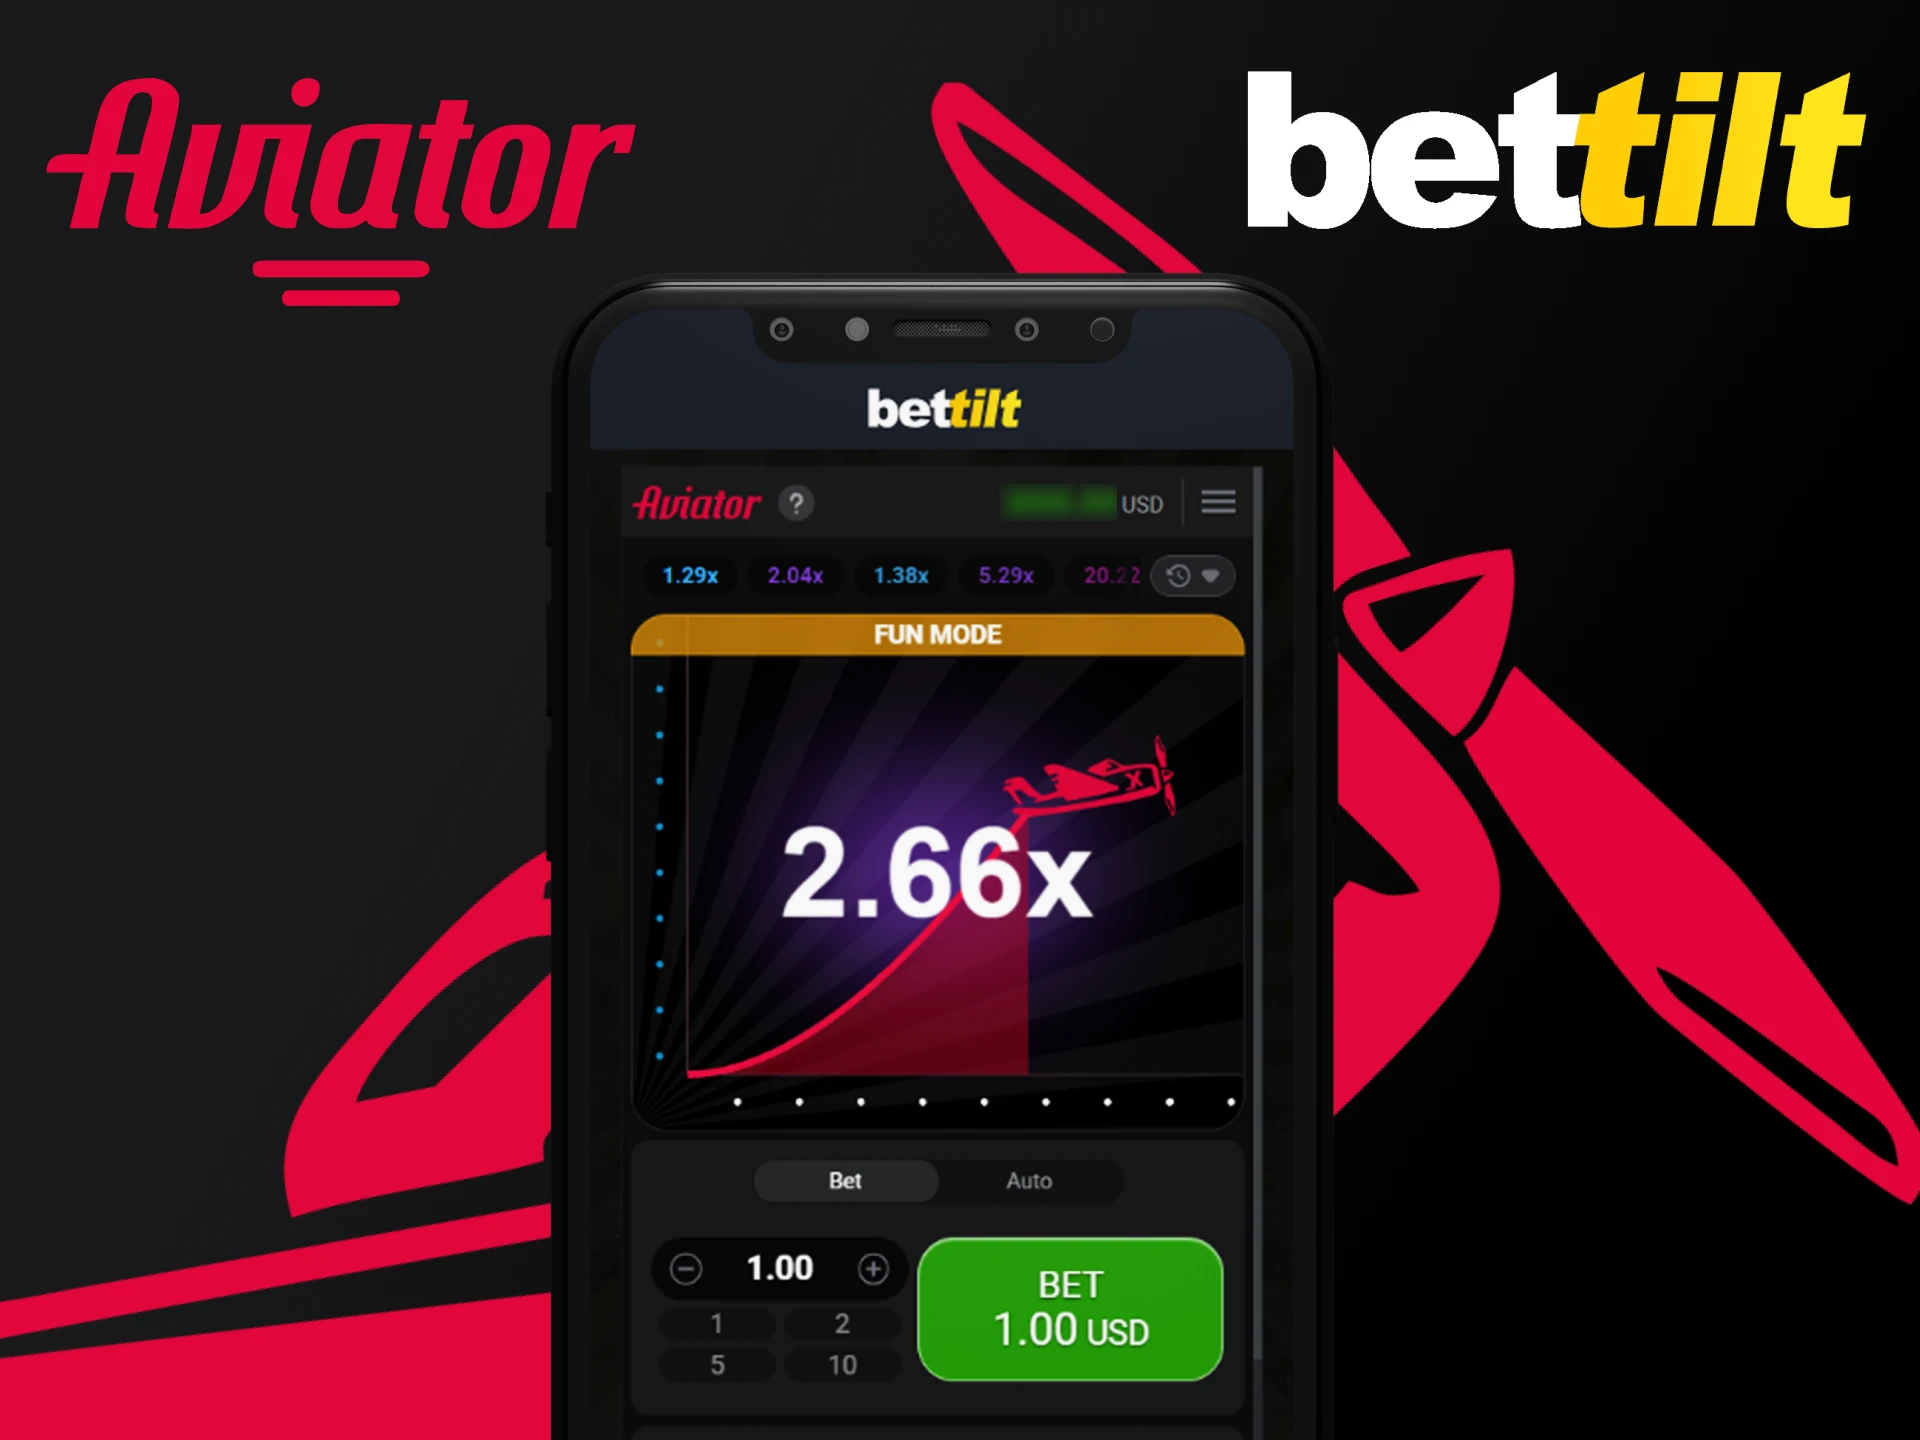 Play the Aviator game with the Bettilt app and win.